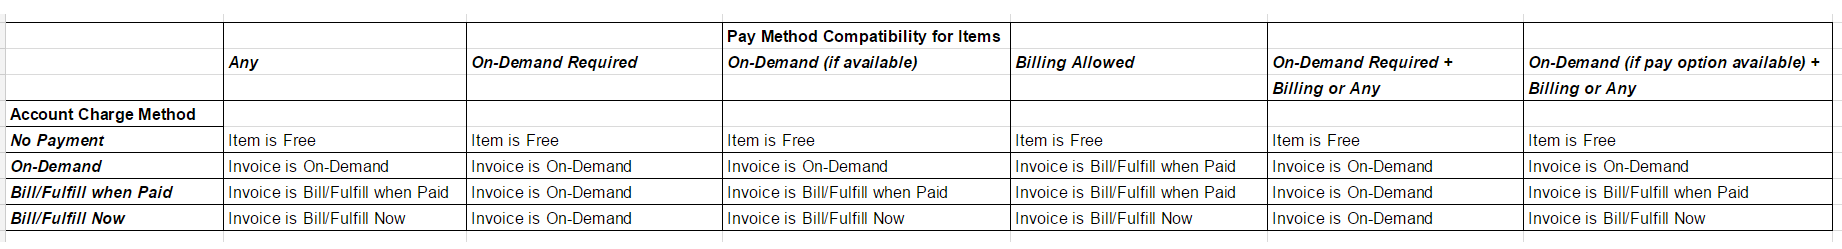 Pay Method Compatibility Chart.png